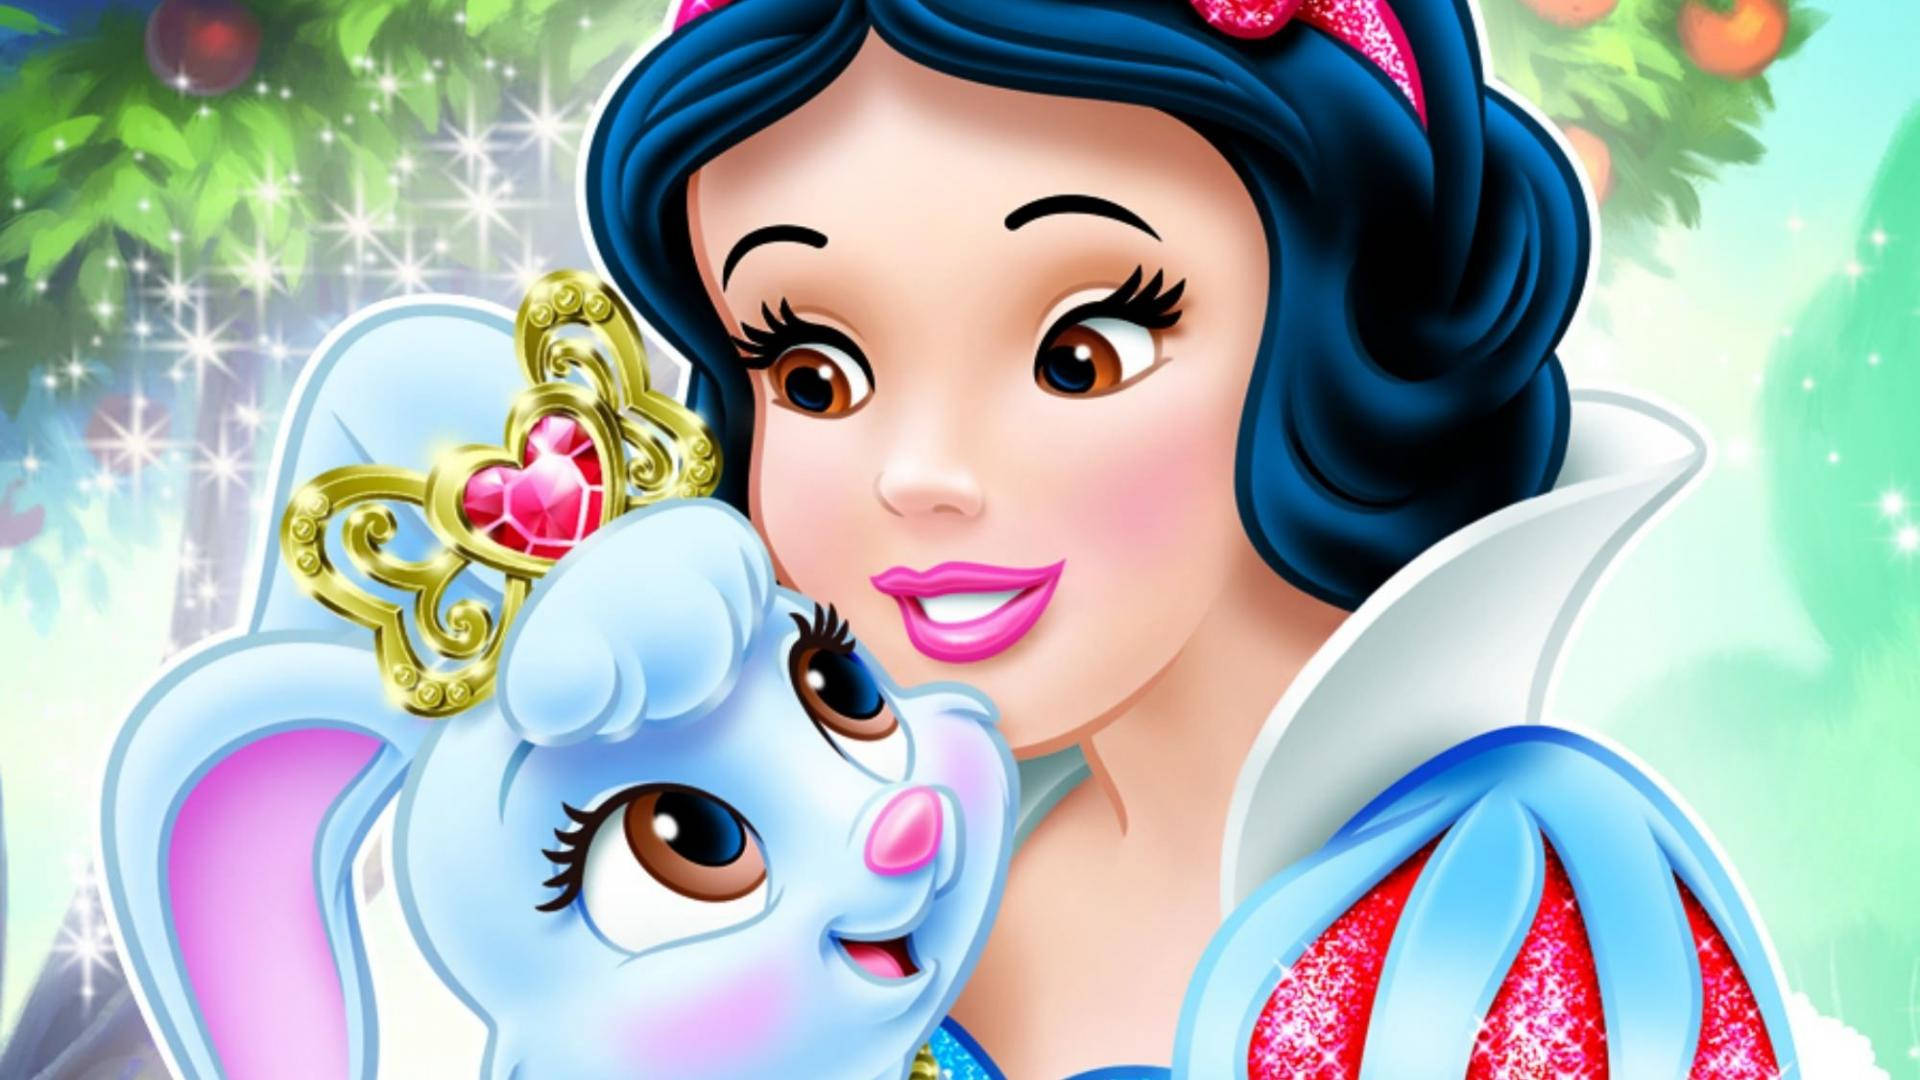 Free Snow White Wallpaper Downloads, [200+] Snow White Wallpapers for FREE  